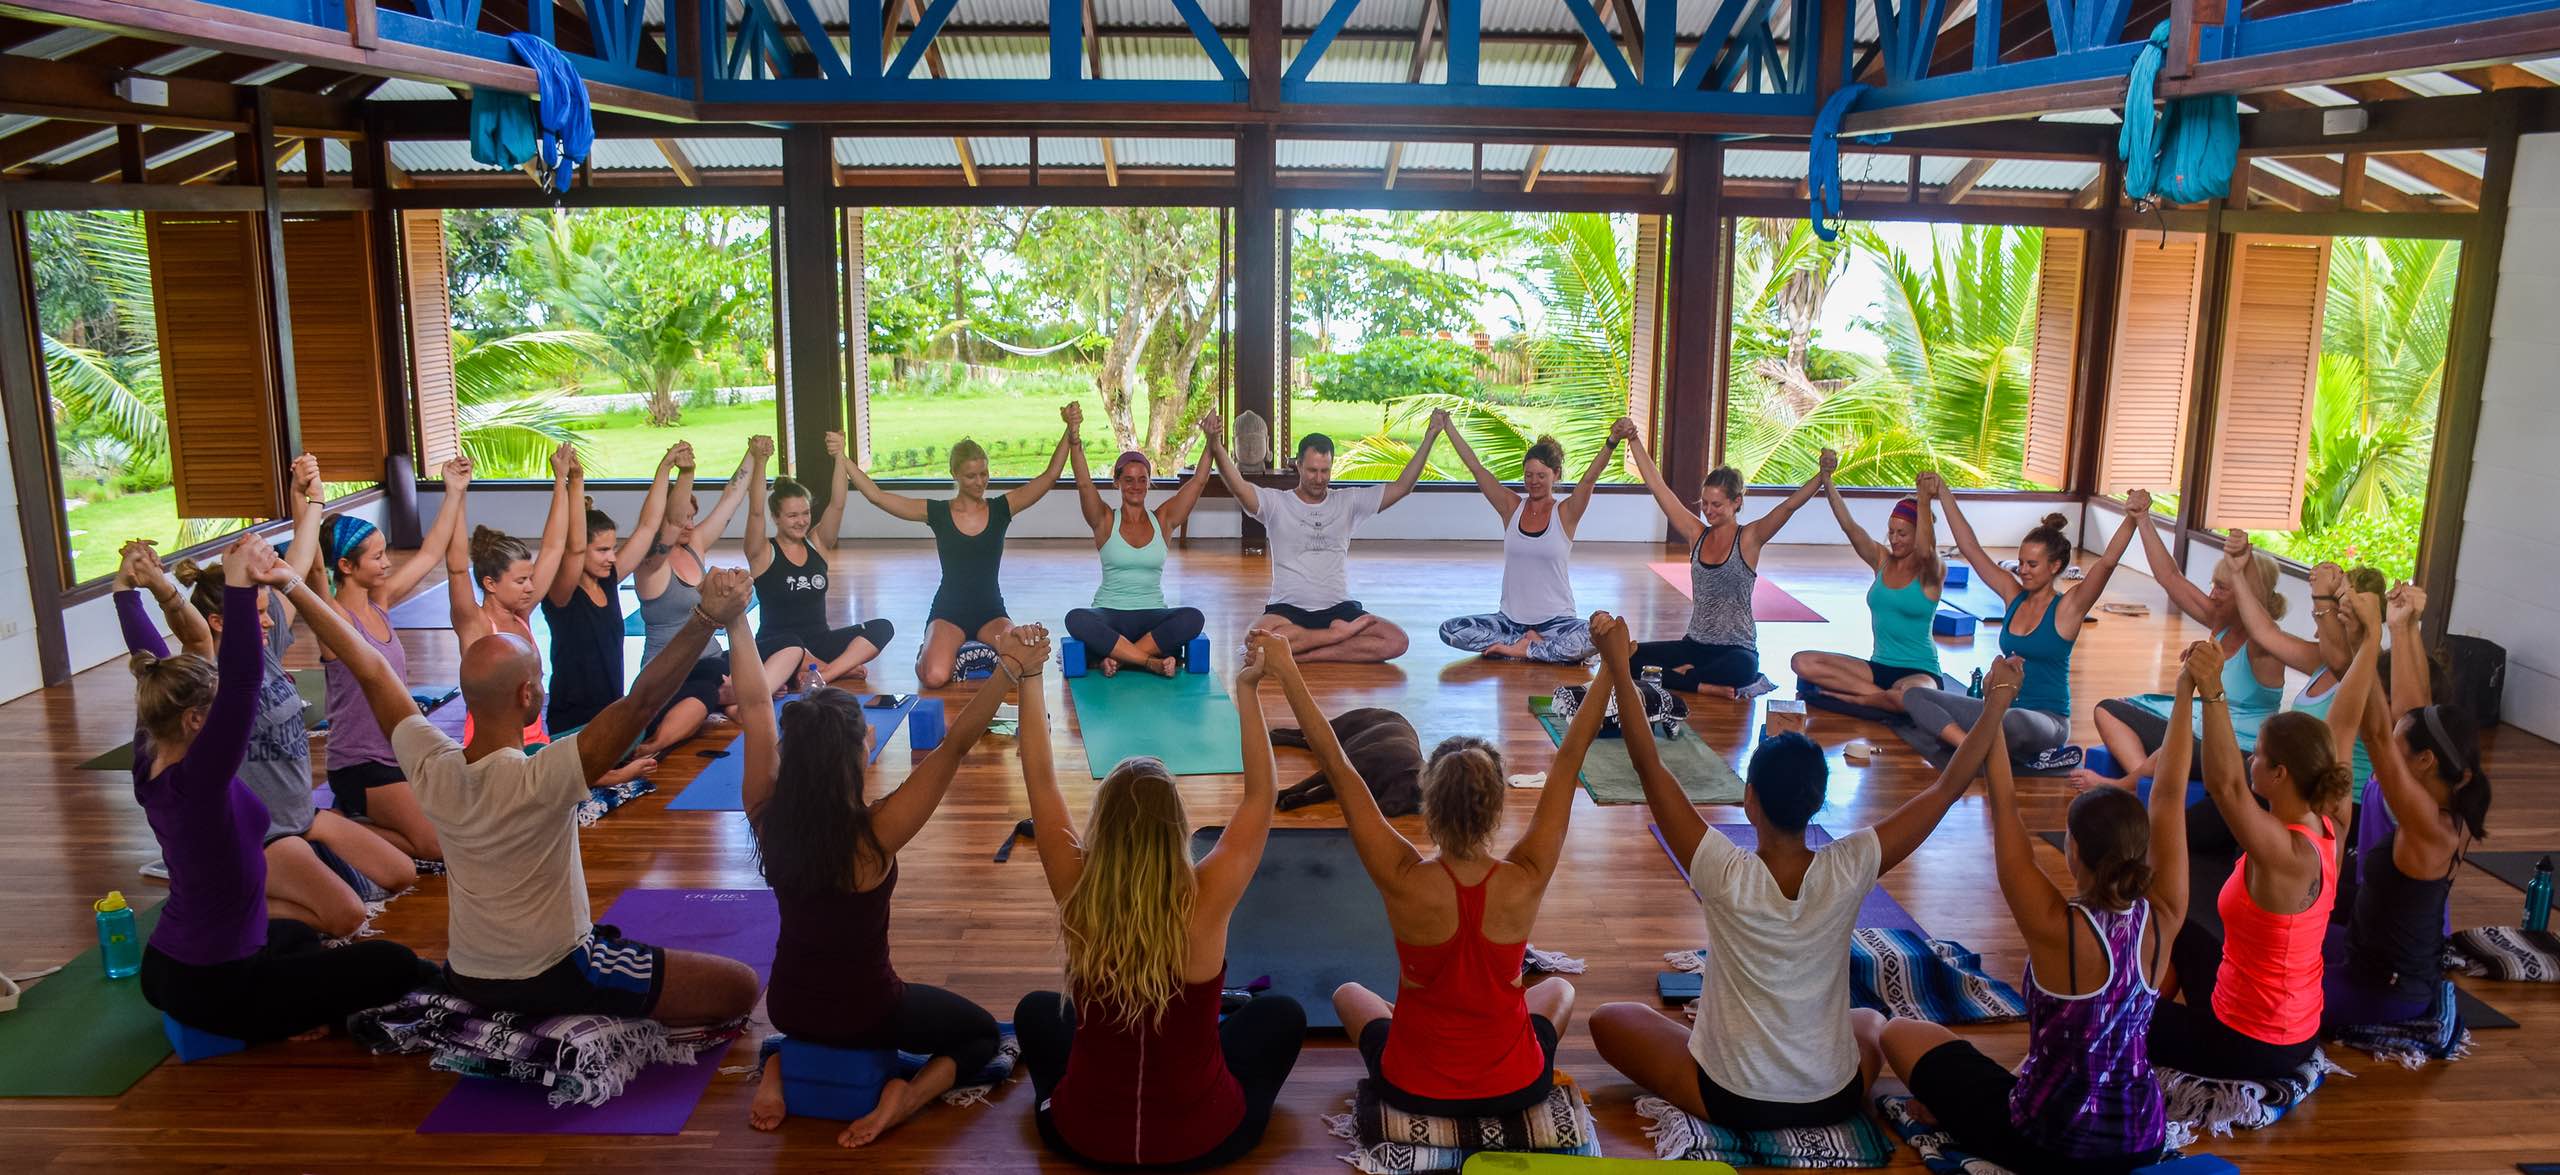 https://www.blueosa.com/wp-content/uploads/2022/09/welcome-to-the-yoga-teacher-training-at-blue-osa-yoga-group-in-a-big-cricle.jpg